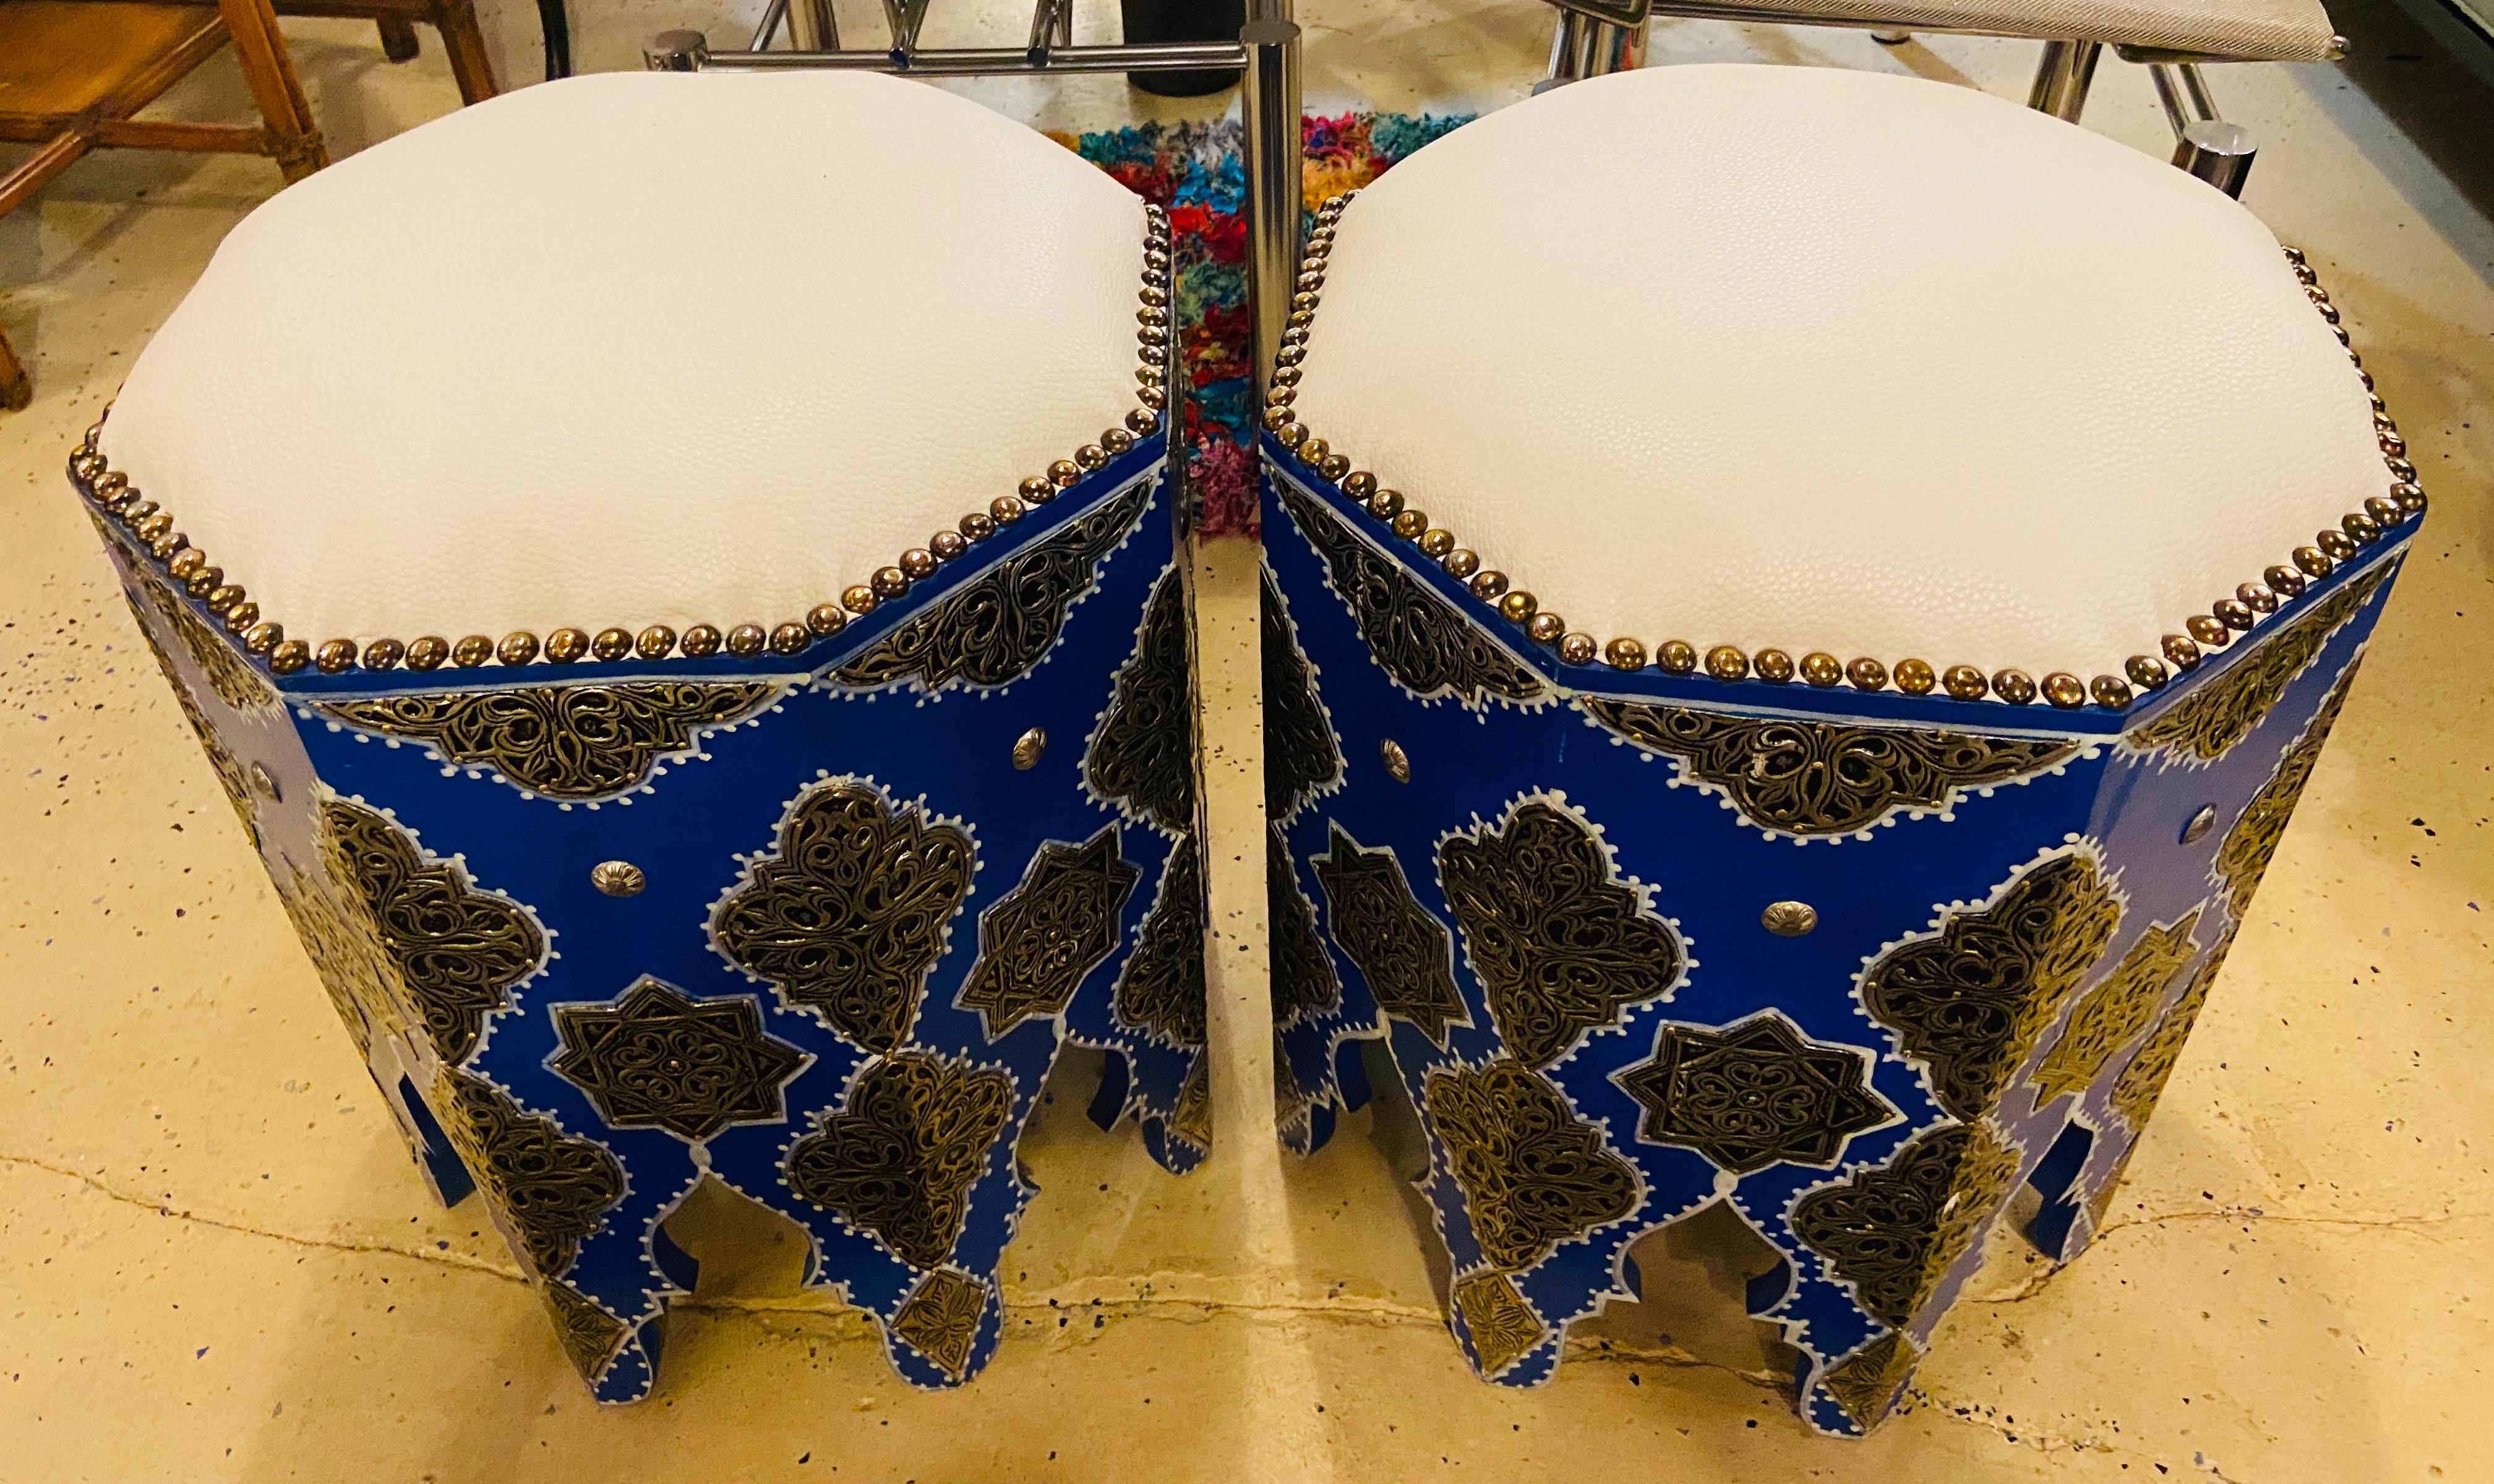 Bohemian Boho Chic Moroccan Blue Majorelle Stool or Ottoman with White Leather Top, Pair For Sale